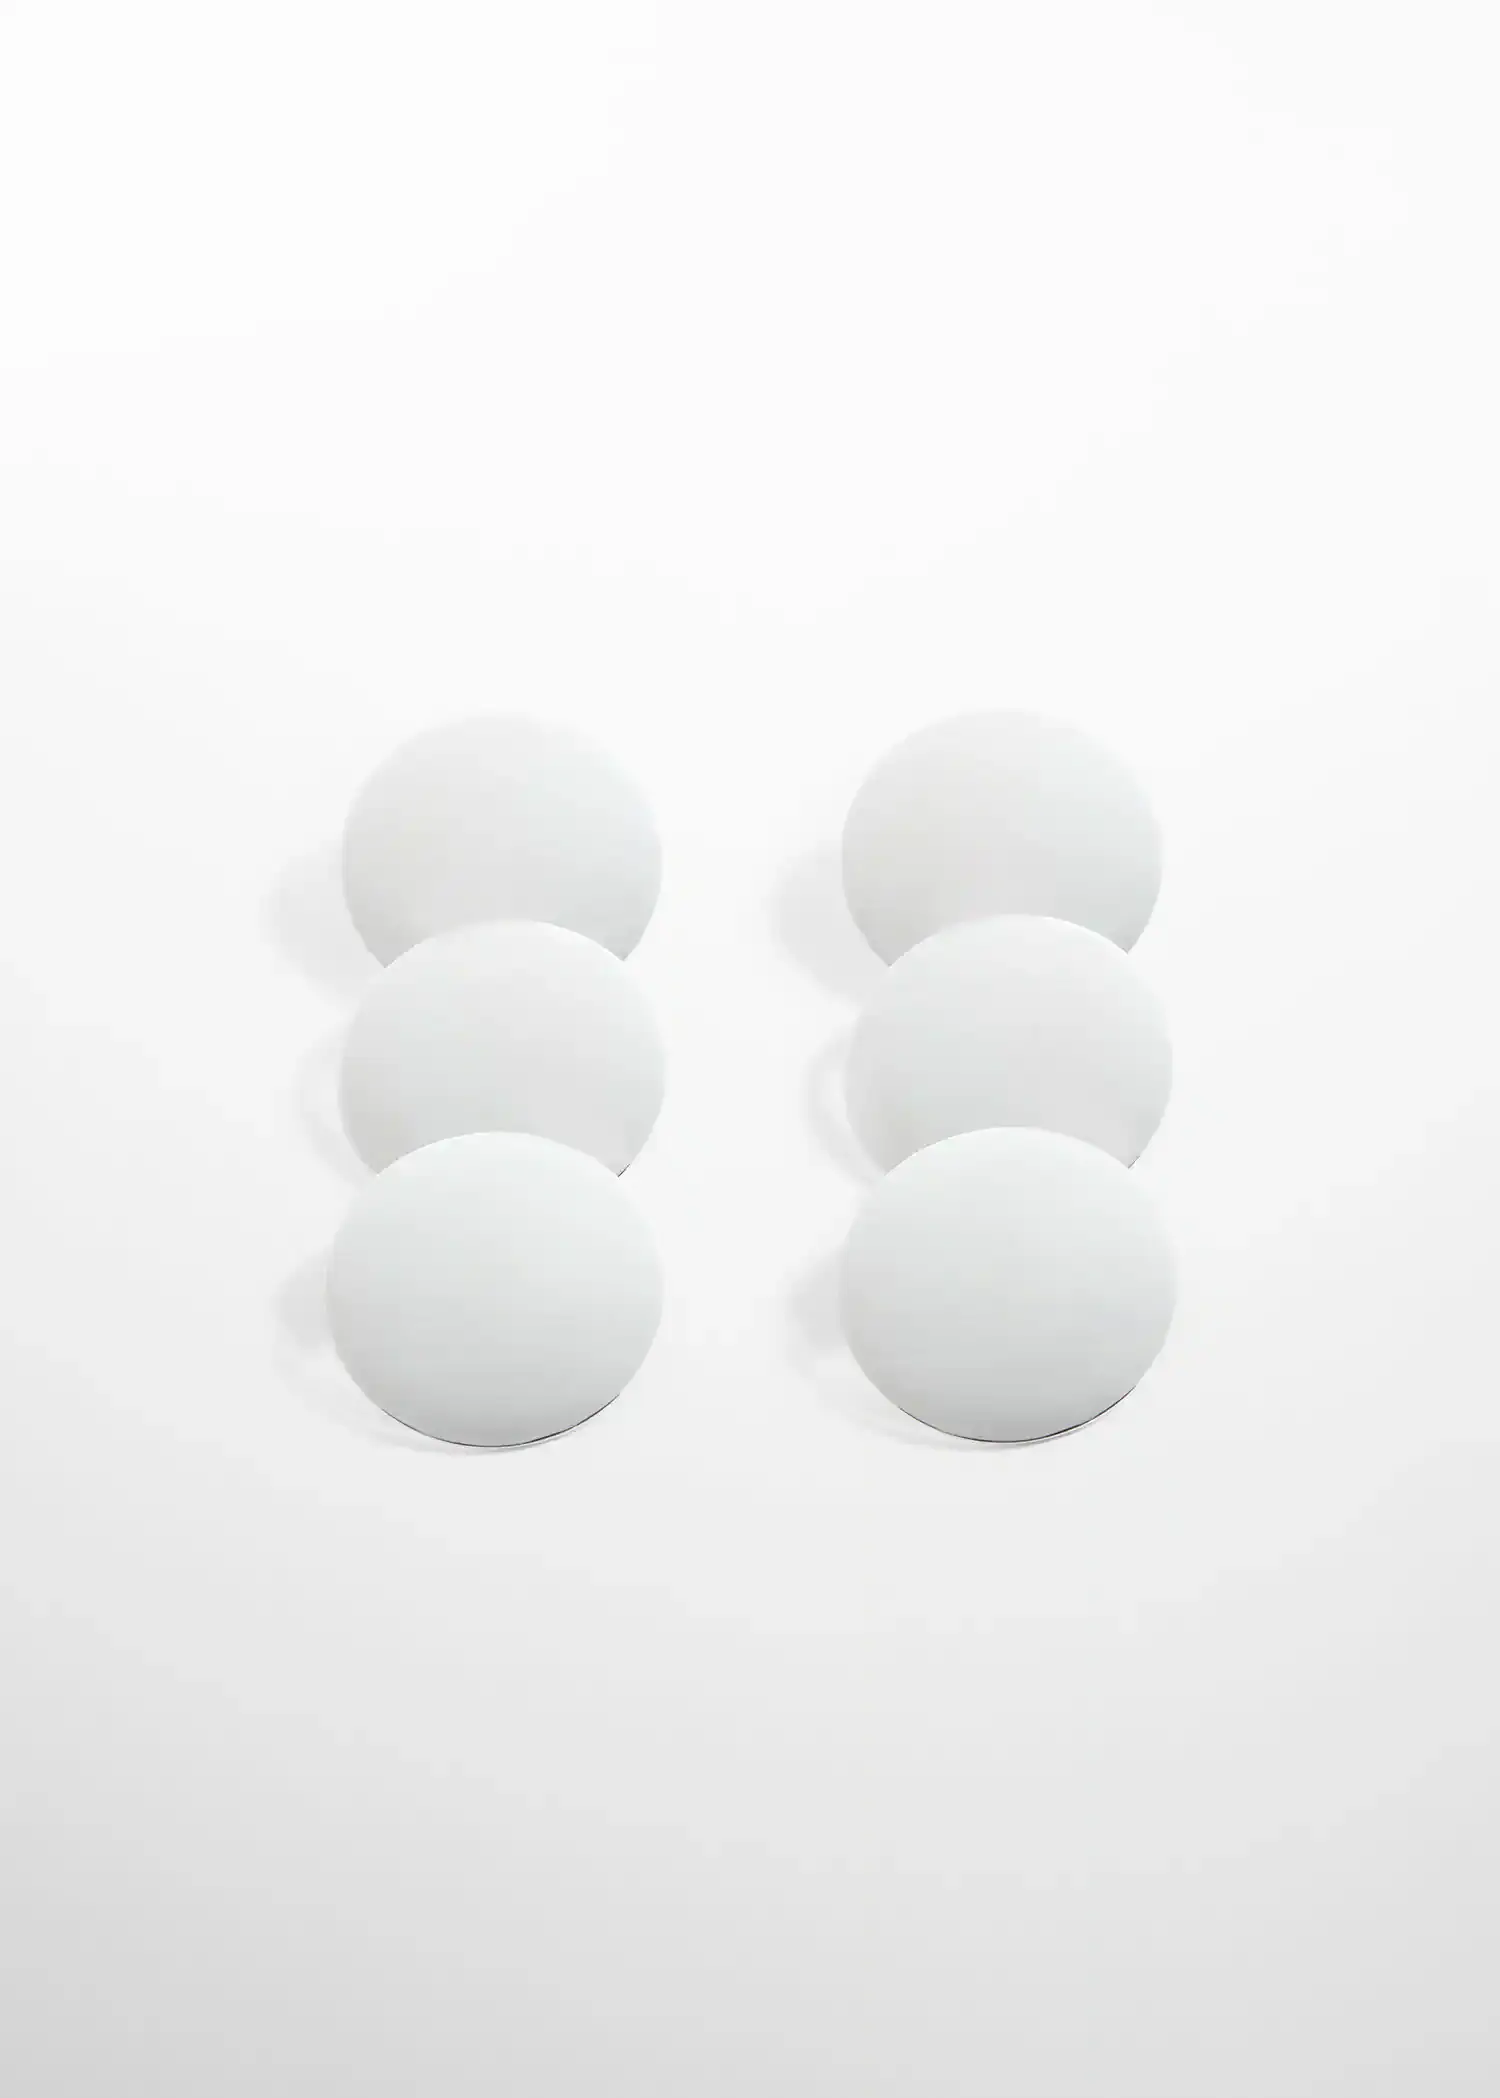 Mango Long earrings with circular design. a group of six white buttons sitting on top of a white surface. 